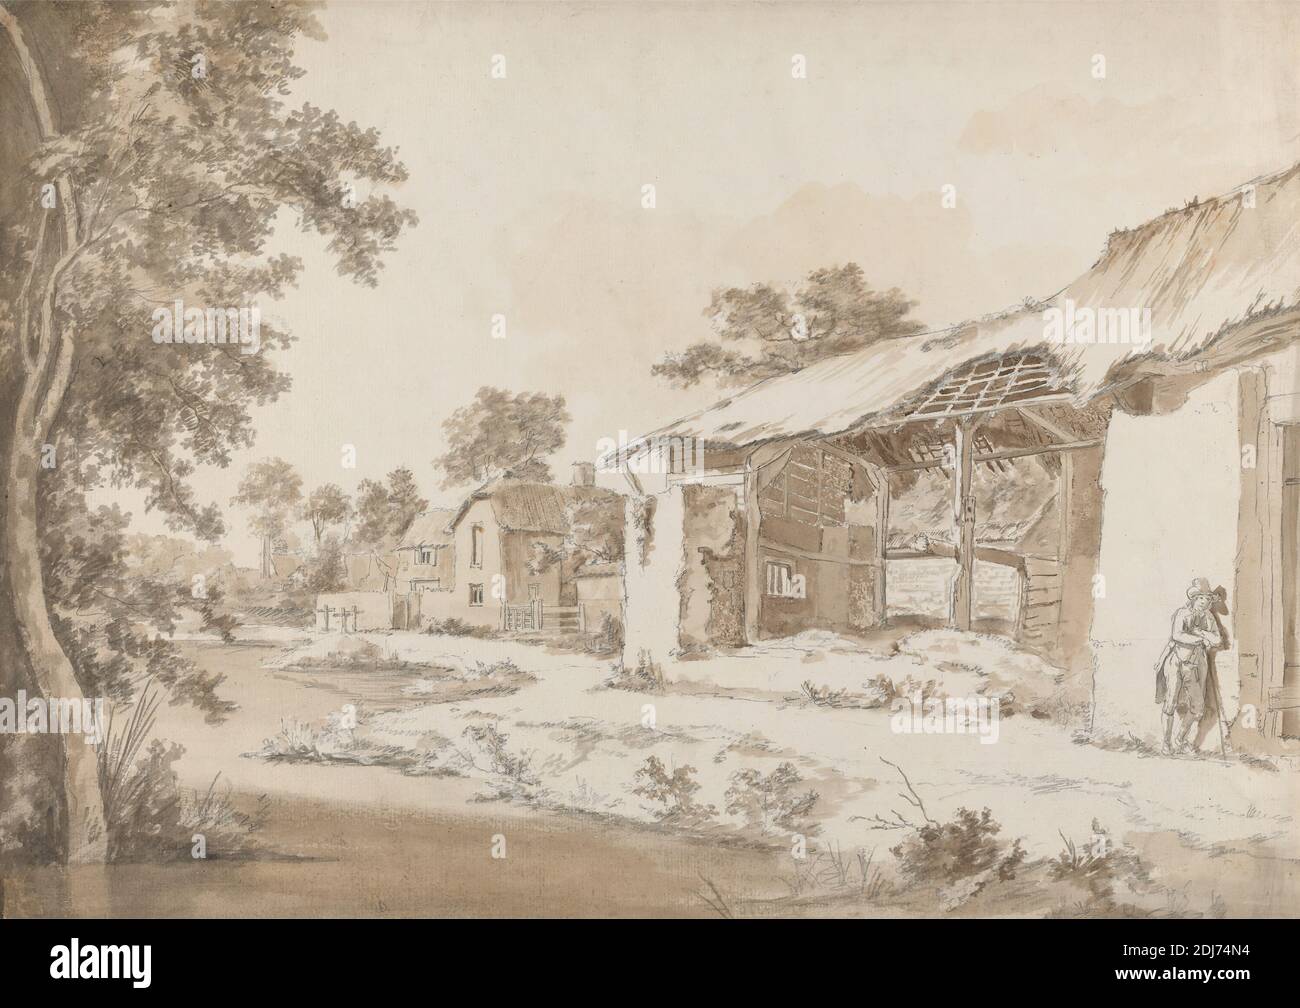 Ruined Farm near Coombe at Gittisham in Devonshire, Three Miles from Honiton, Devon, Hendrik Frans de Cort, 1742–1810, German, active in Britain (from 1789), 1794, Graphite, brown wash and gray wash on medium, slightly textured, cream laid paper, Sheet: 12 7/8 x 18 1/4 inches (32.7 x 46.4 cm), architectural subject Stock Photo